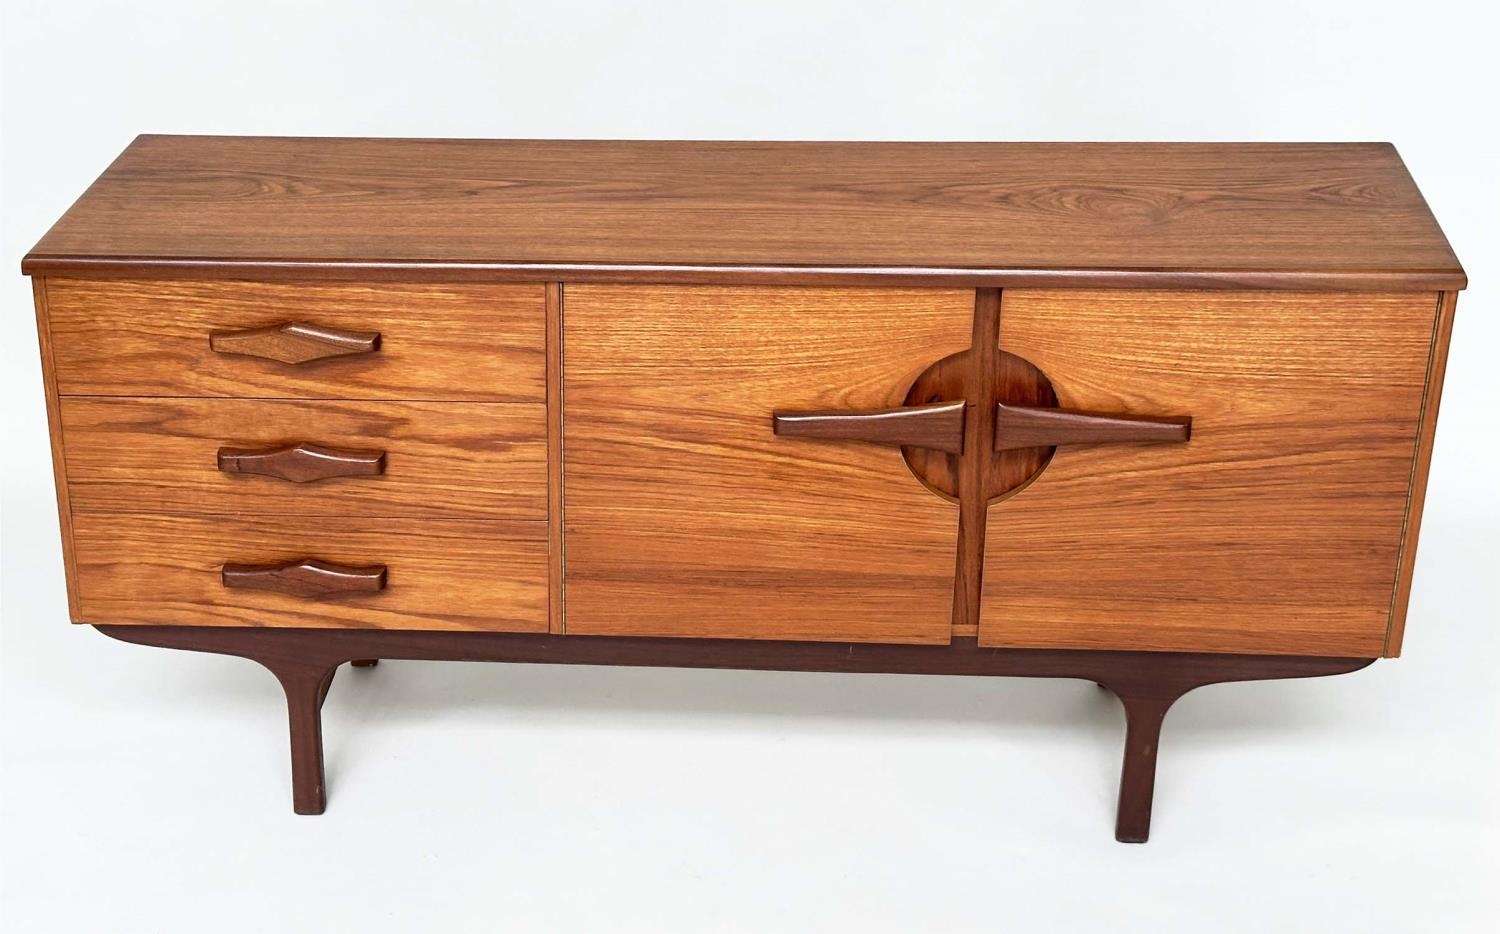 SIDEBOARD, mid 20th century teak with two doors and three drawers, 166cm x 40cm x 75cm H. - Image 3 of 10